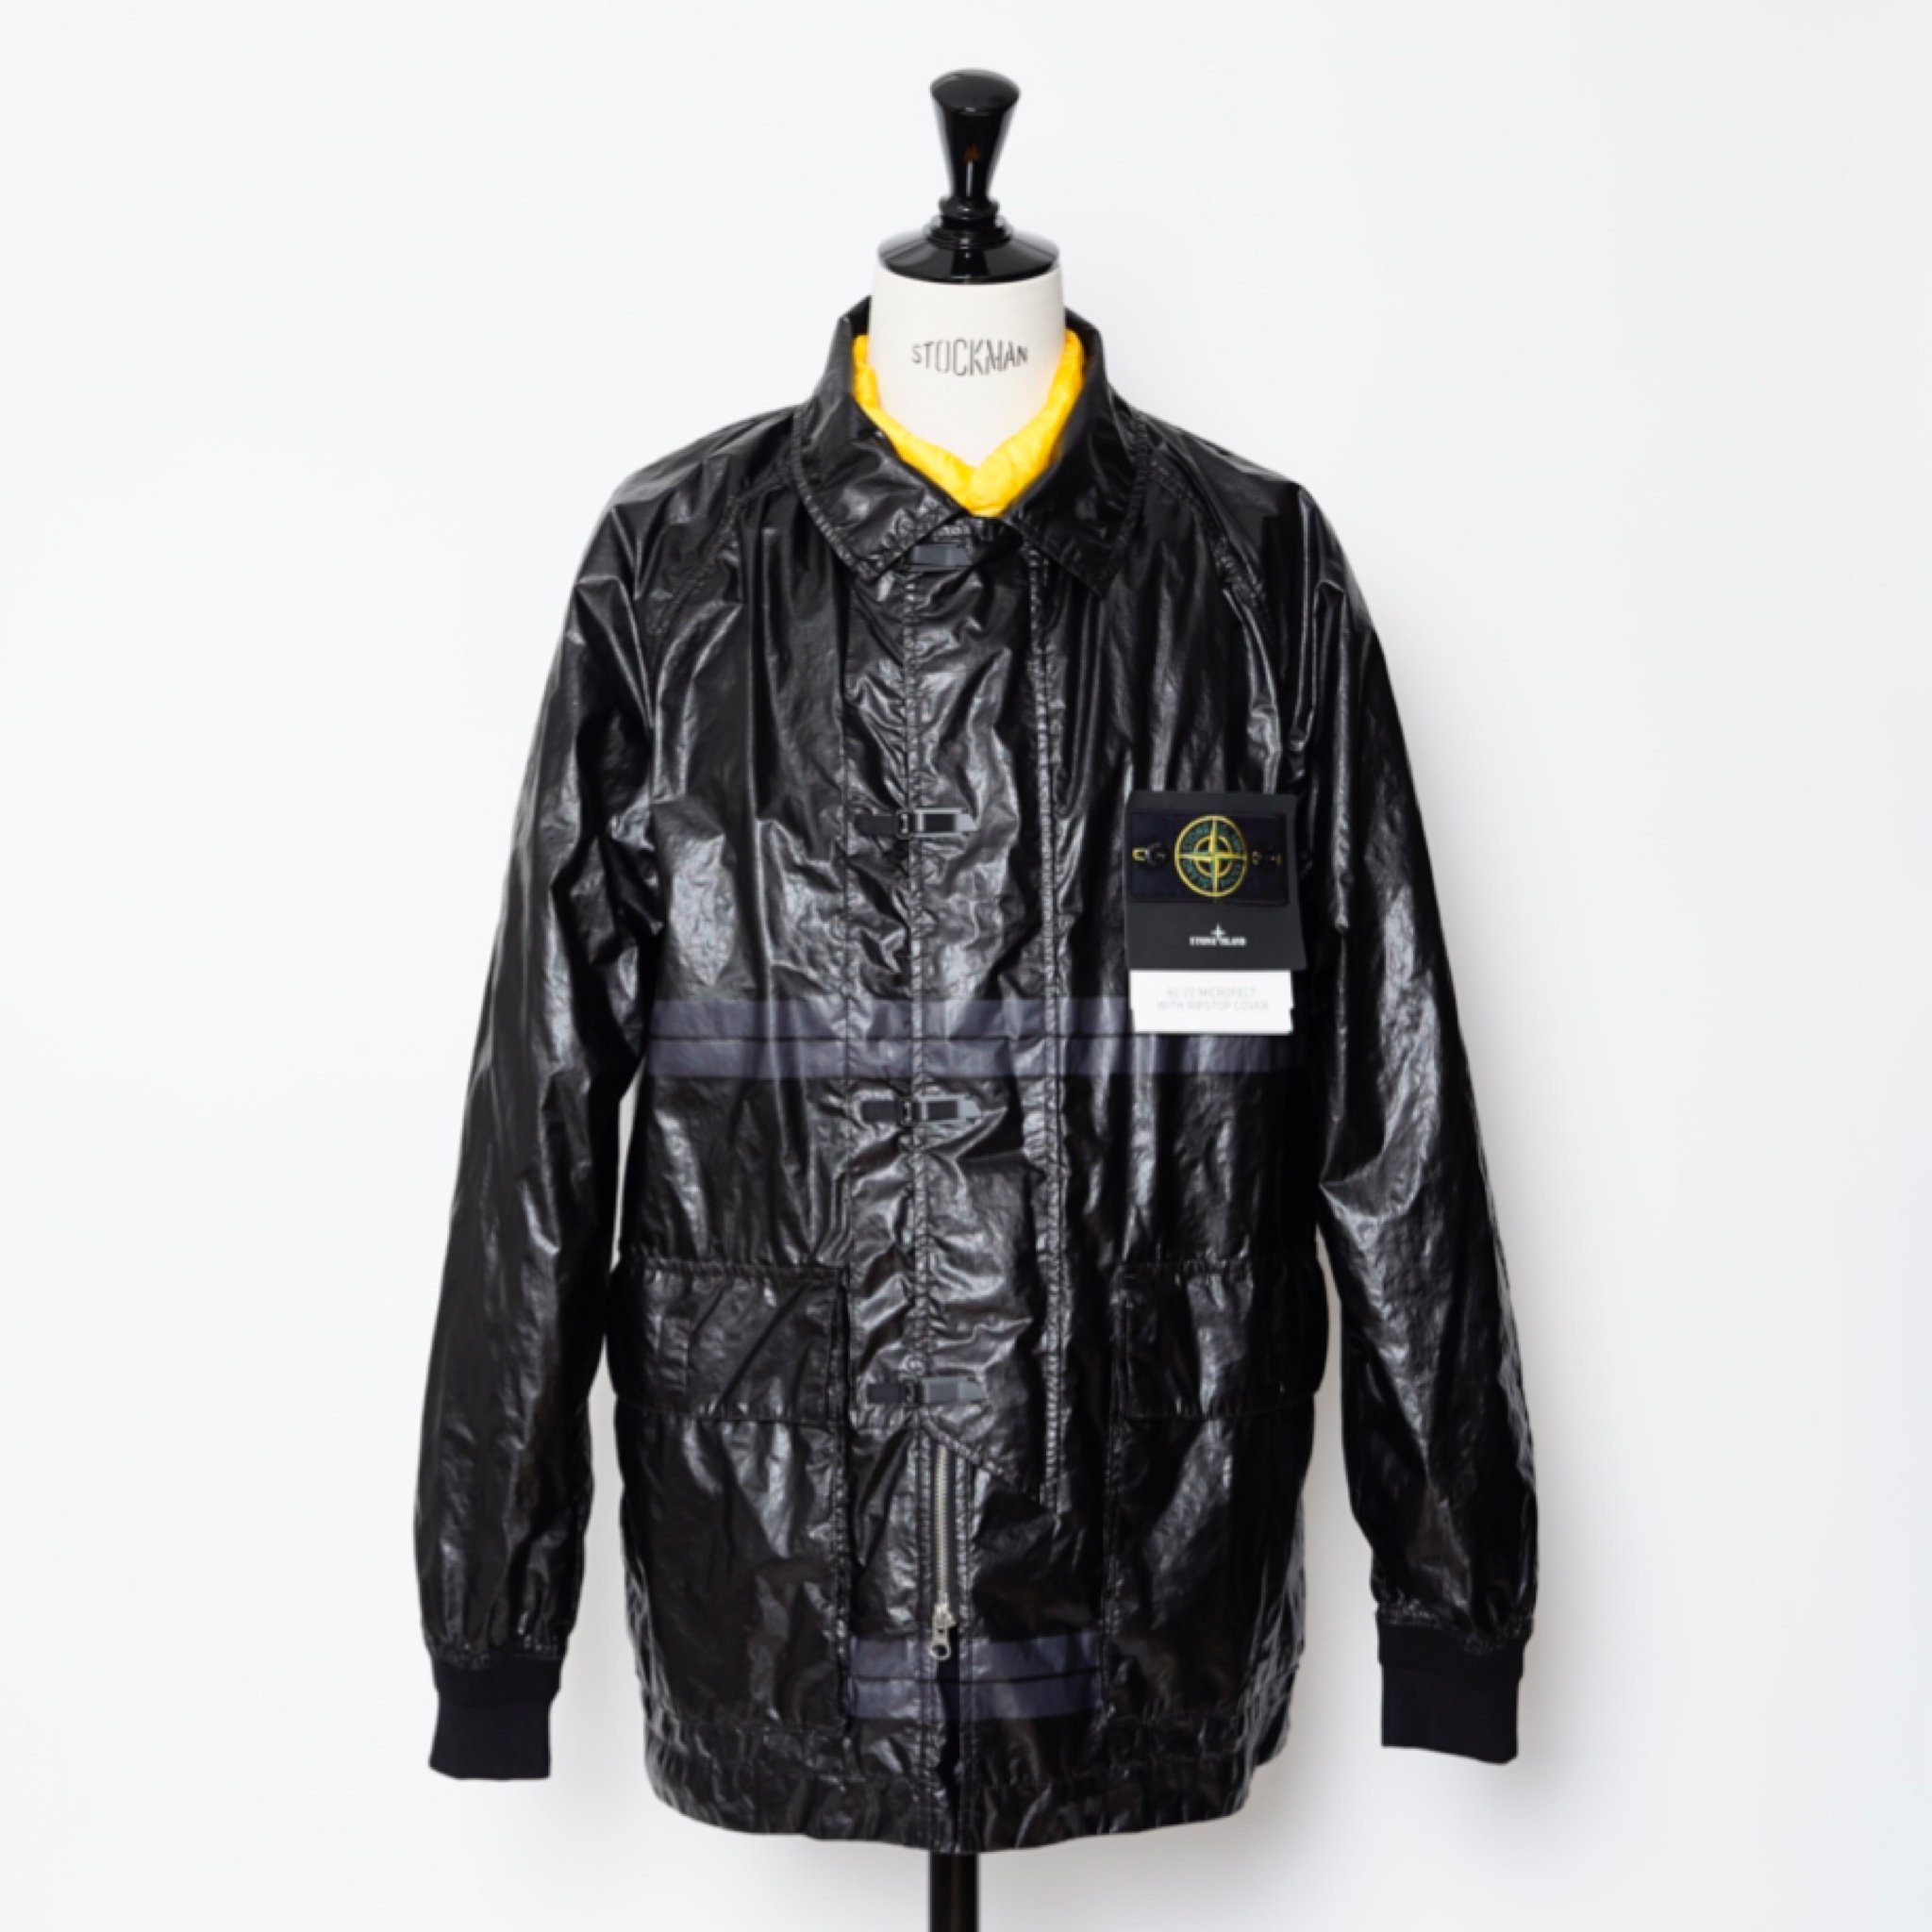 <img class='new_mark_img1' src='https://img.shop-pro.jp/img/new/icons20.gif' style='border:none;display:inline;margin:0px;padding:0px;width:auto;' />【STONE ISLAND】-MICROFELT WITH RIPSTOP- コーチジャケット